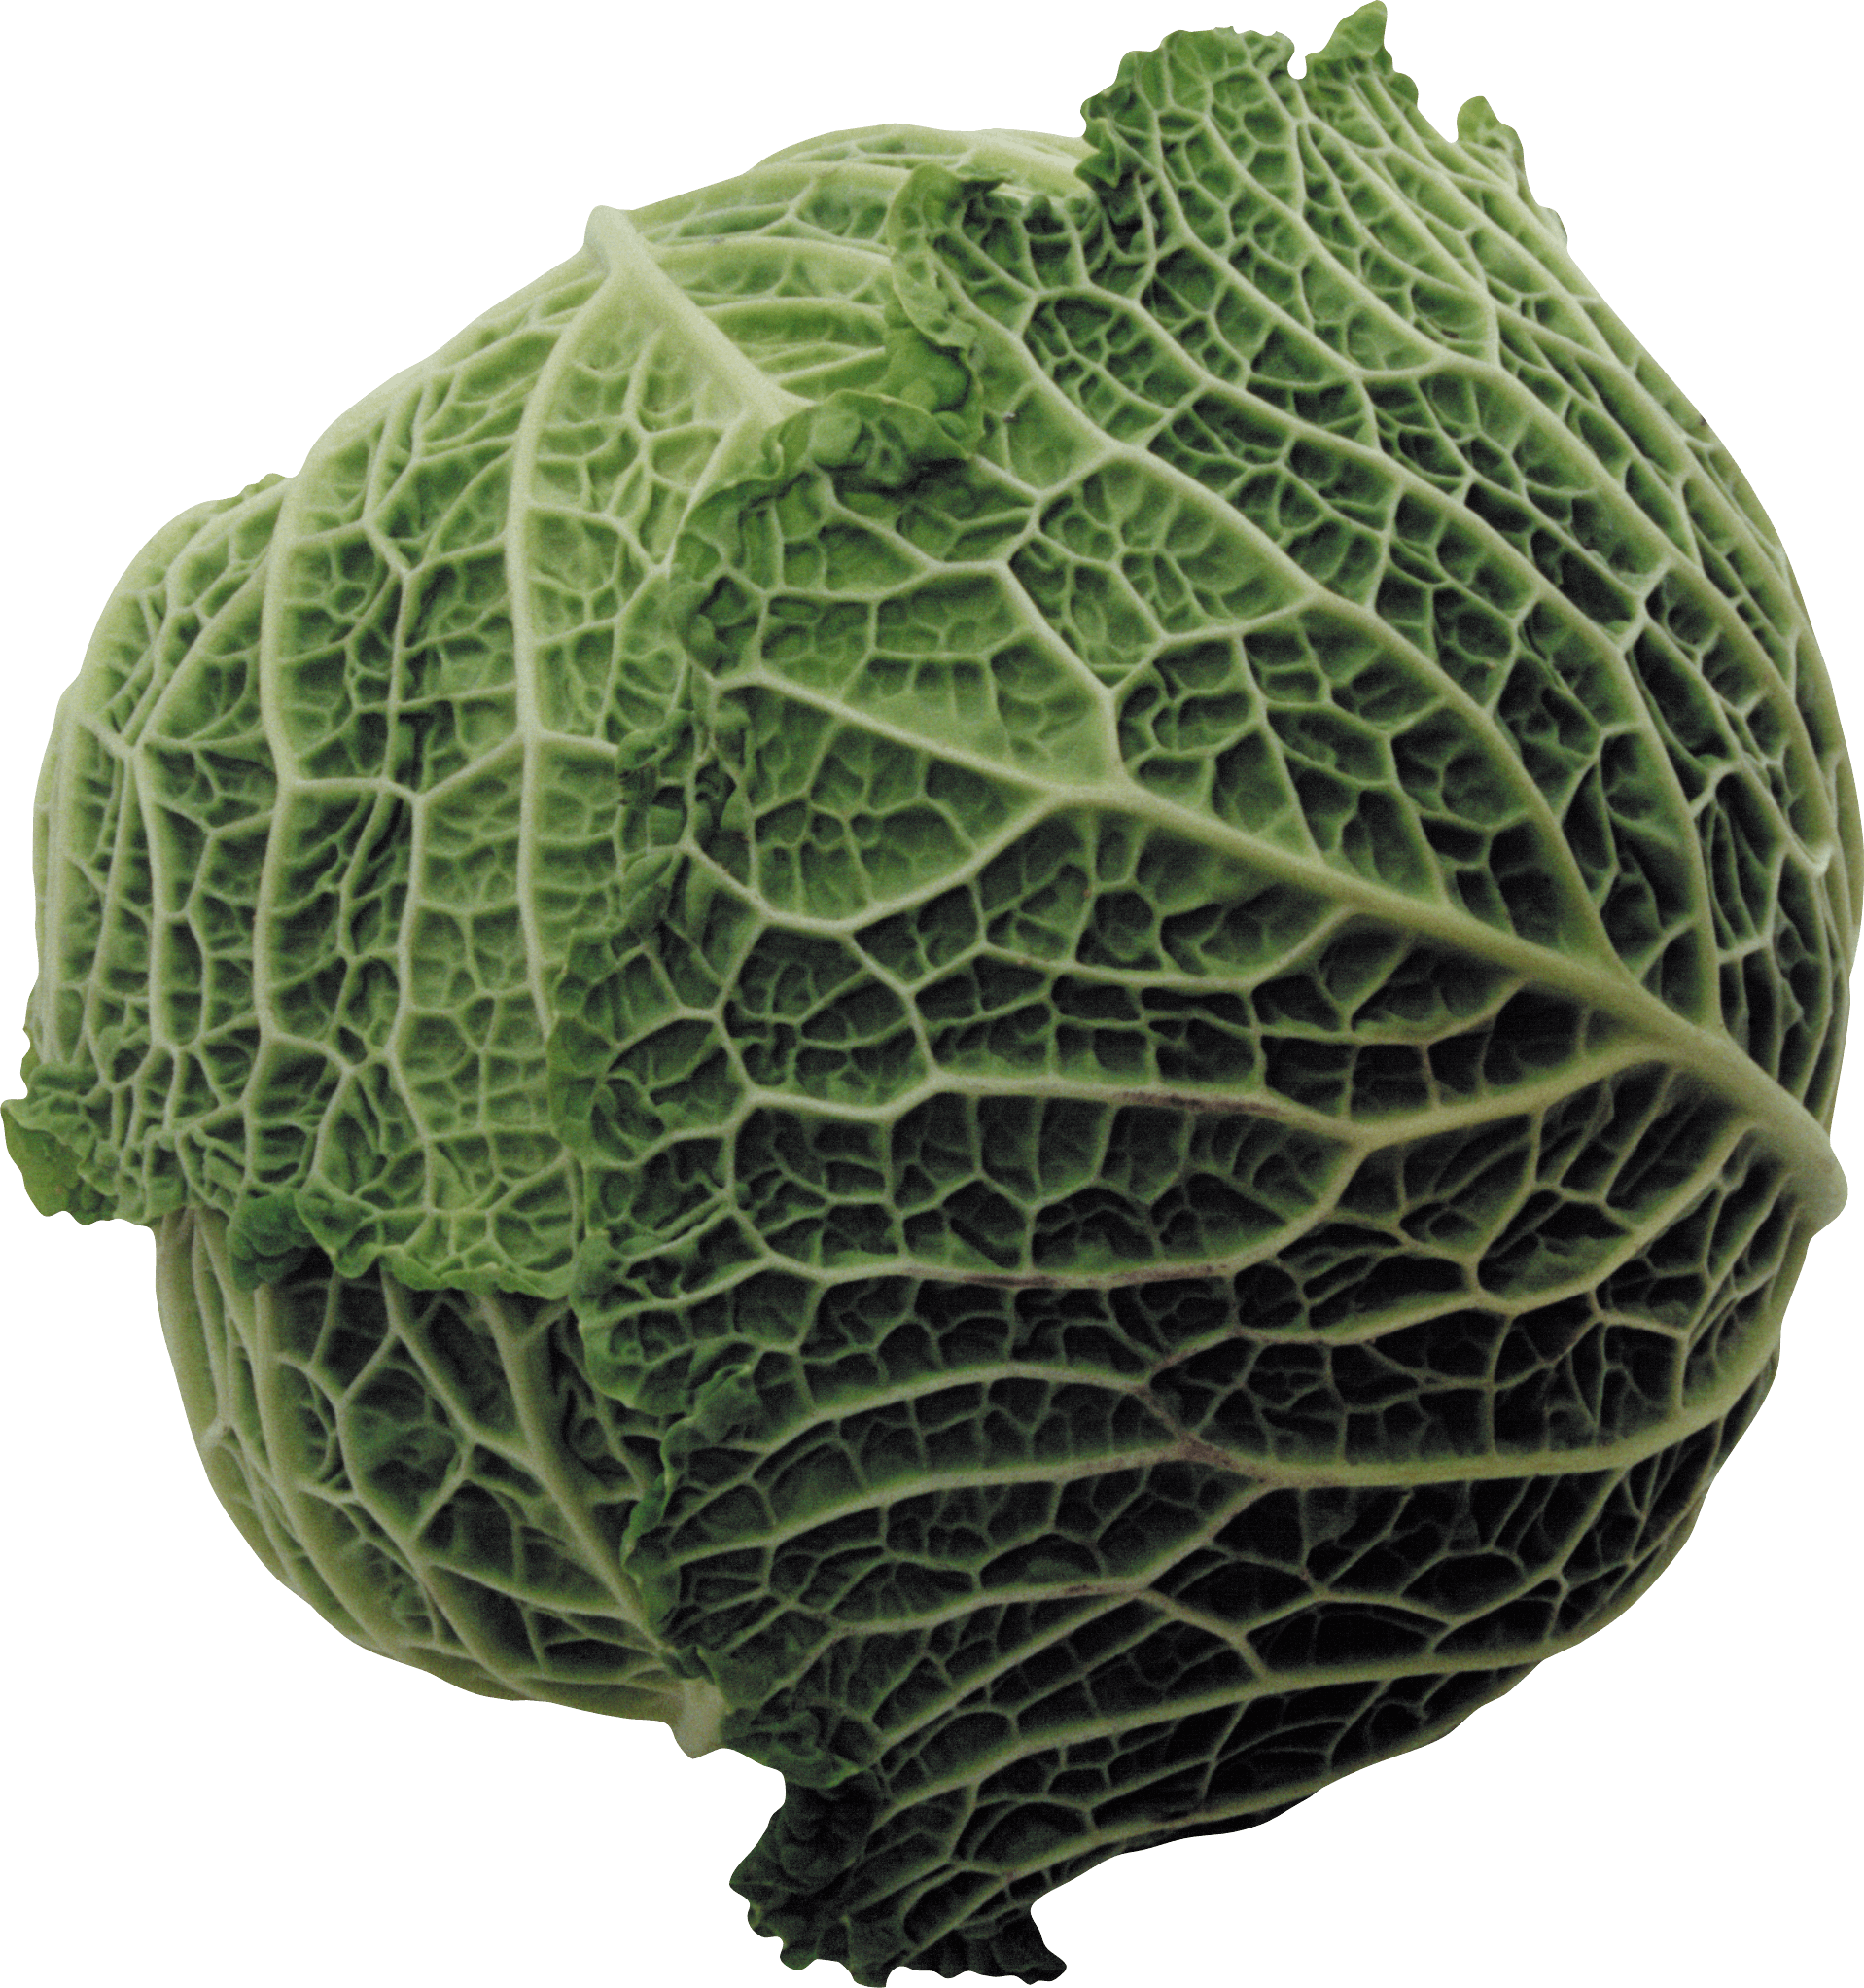 A Close Up Of A Head Of Cabbage